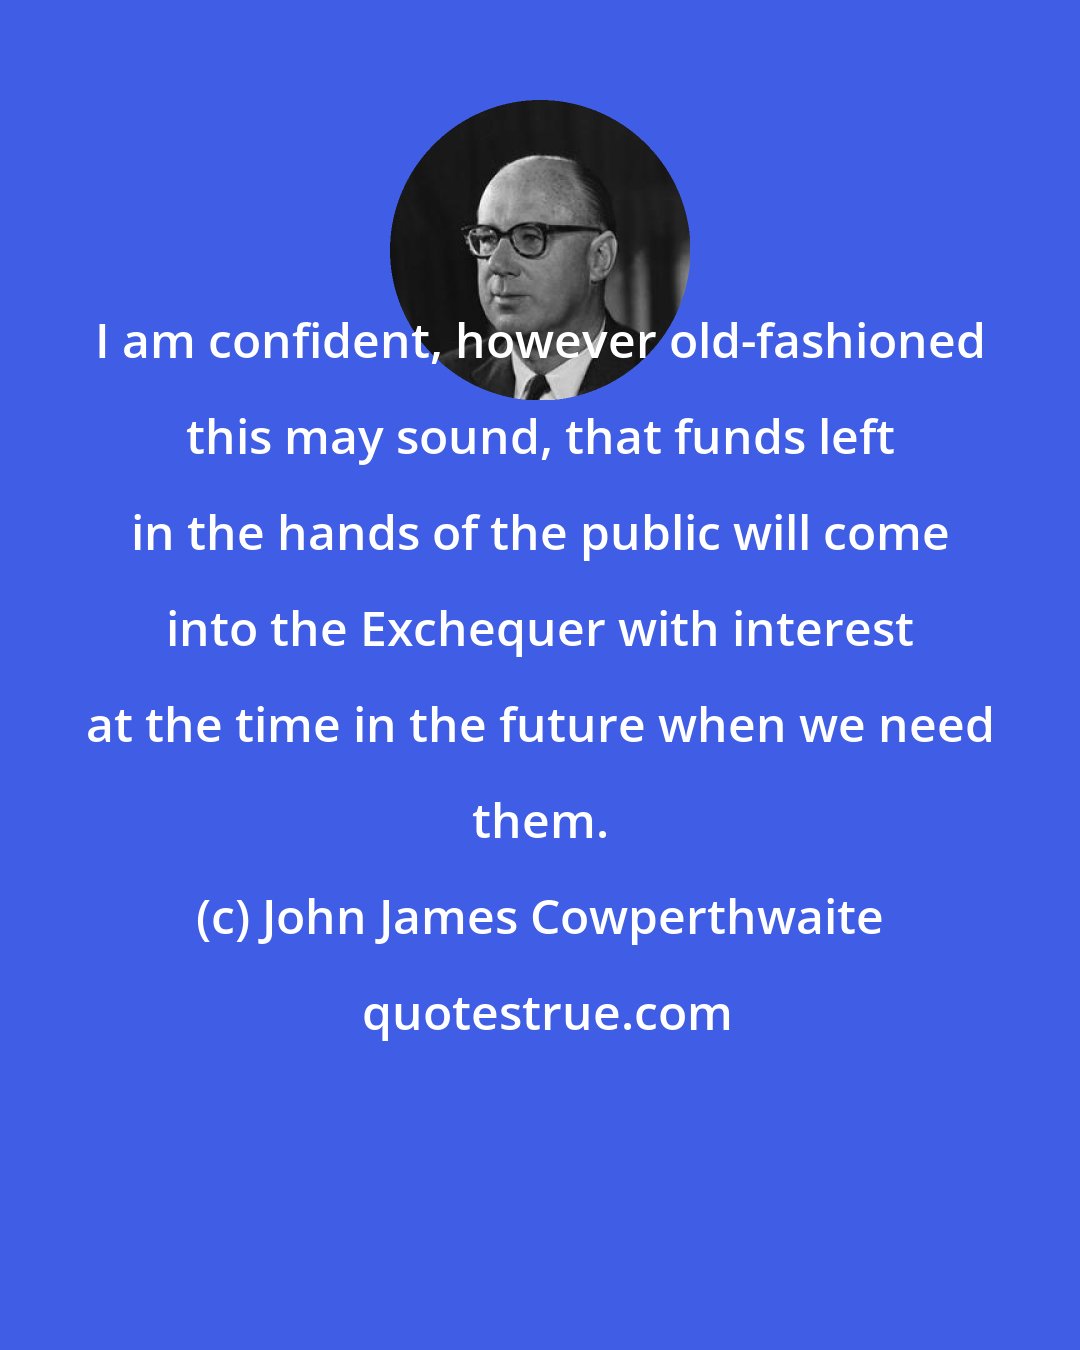 John James Cowperthwaite: I am confident, however old-fashioned this may sound, that funds left in the hands of the public will come into the Exchequer with interest at the time in the future when we need them.